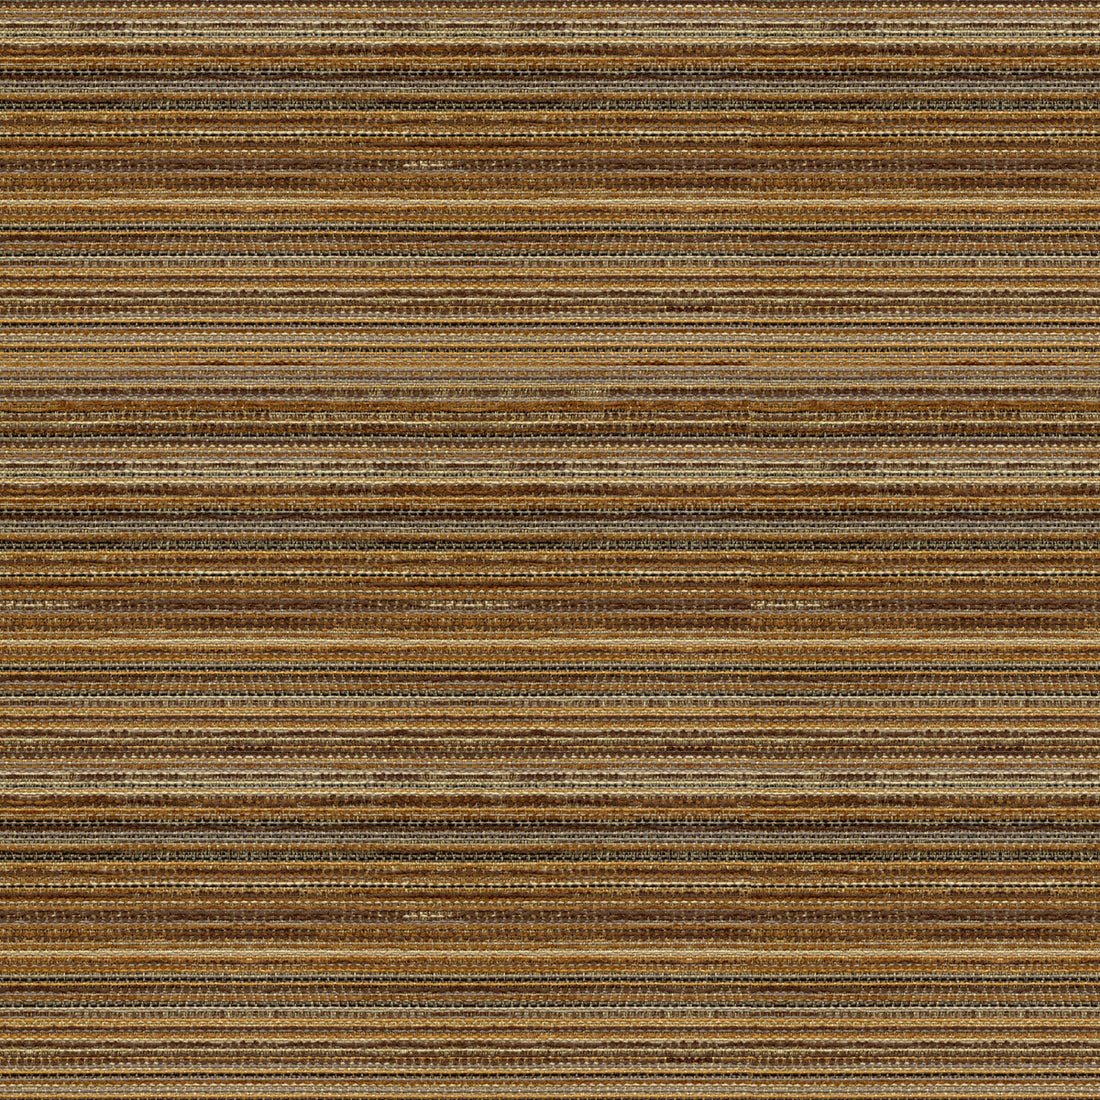 Myasi fabric in rattan color - pattern 33870.624.0 - by Kravet Contract in the Tanzania J Banks collection